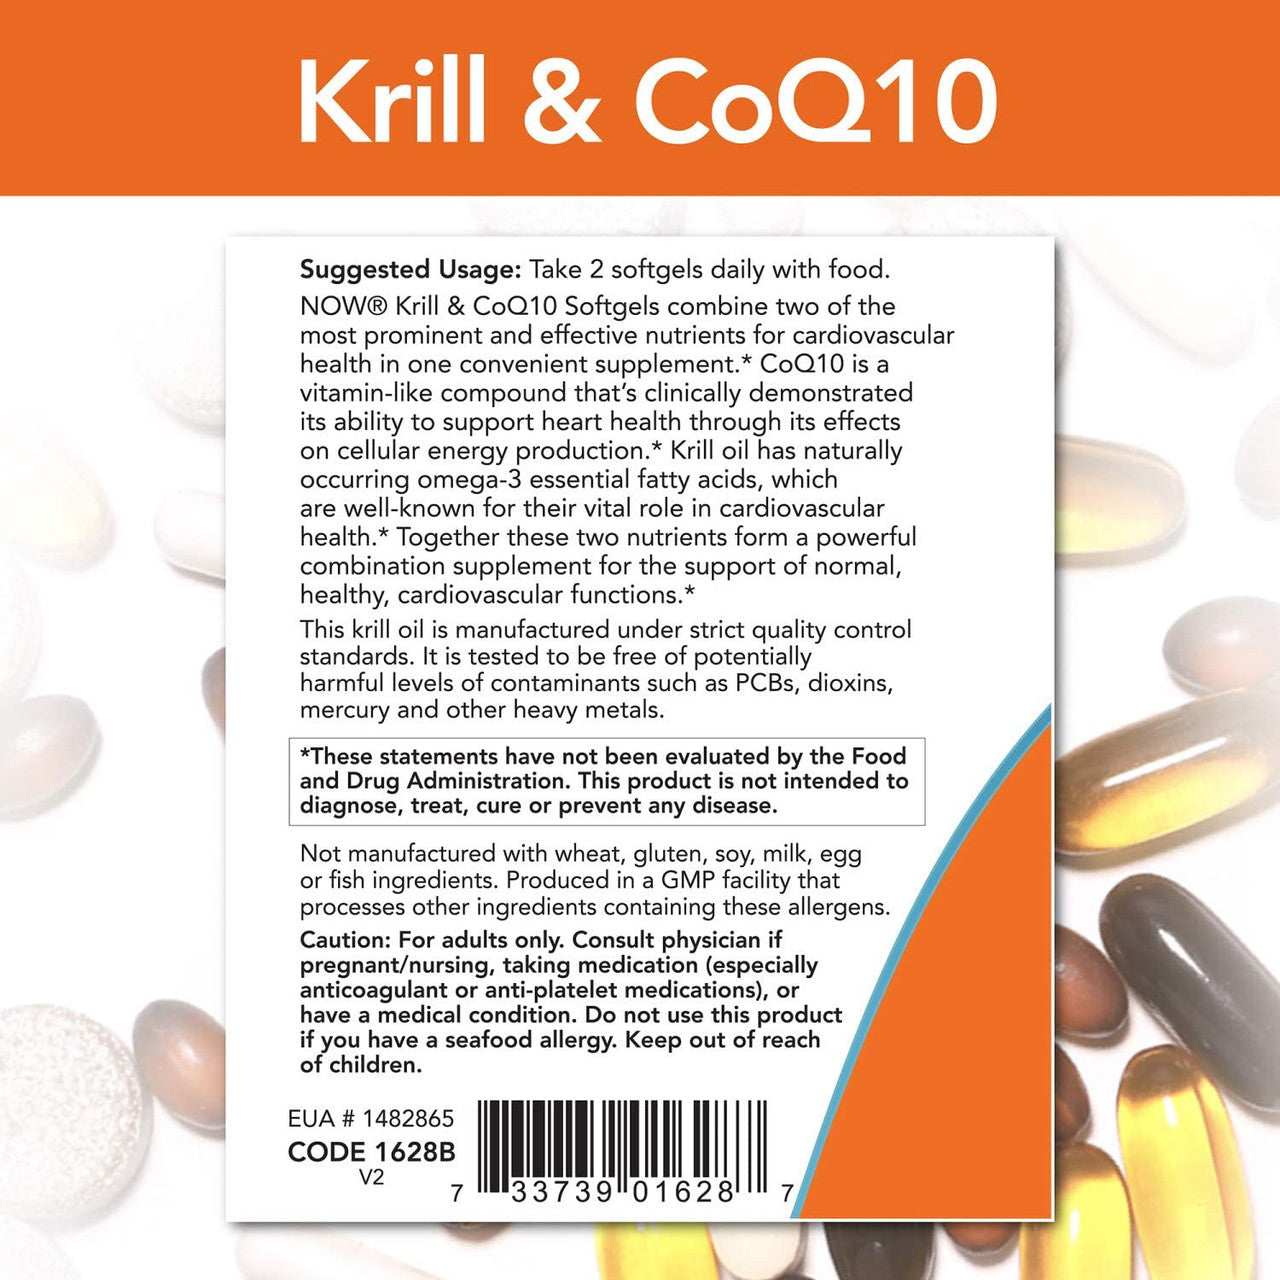 Now Krill & CoQ10 suggested used